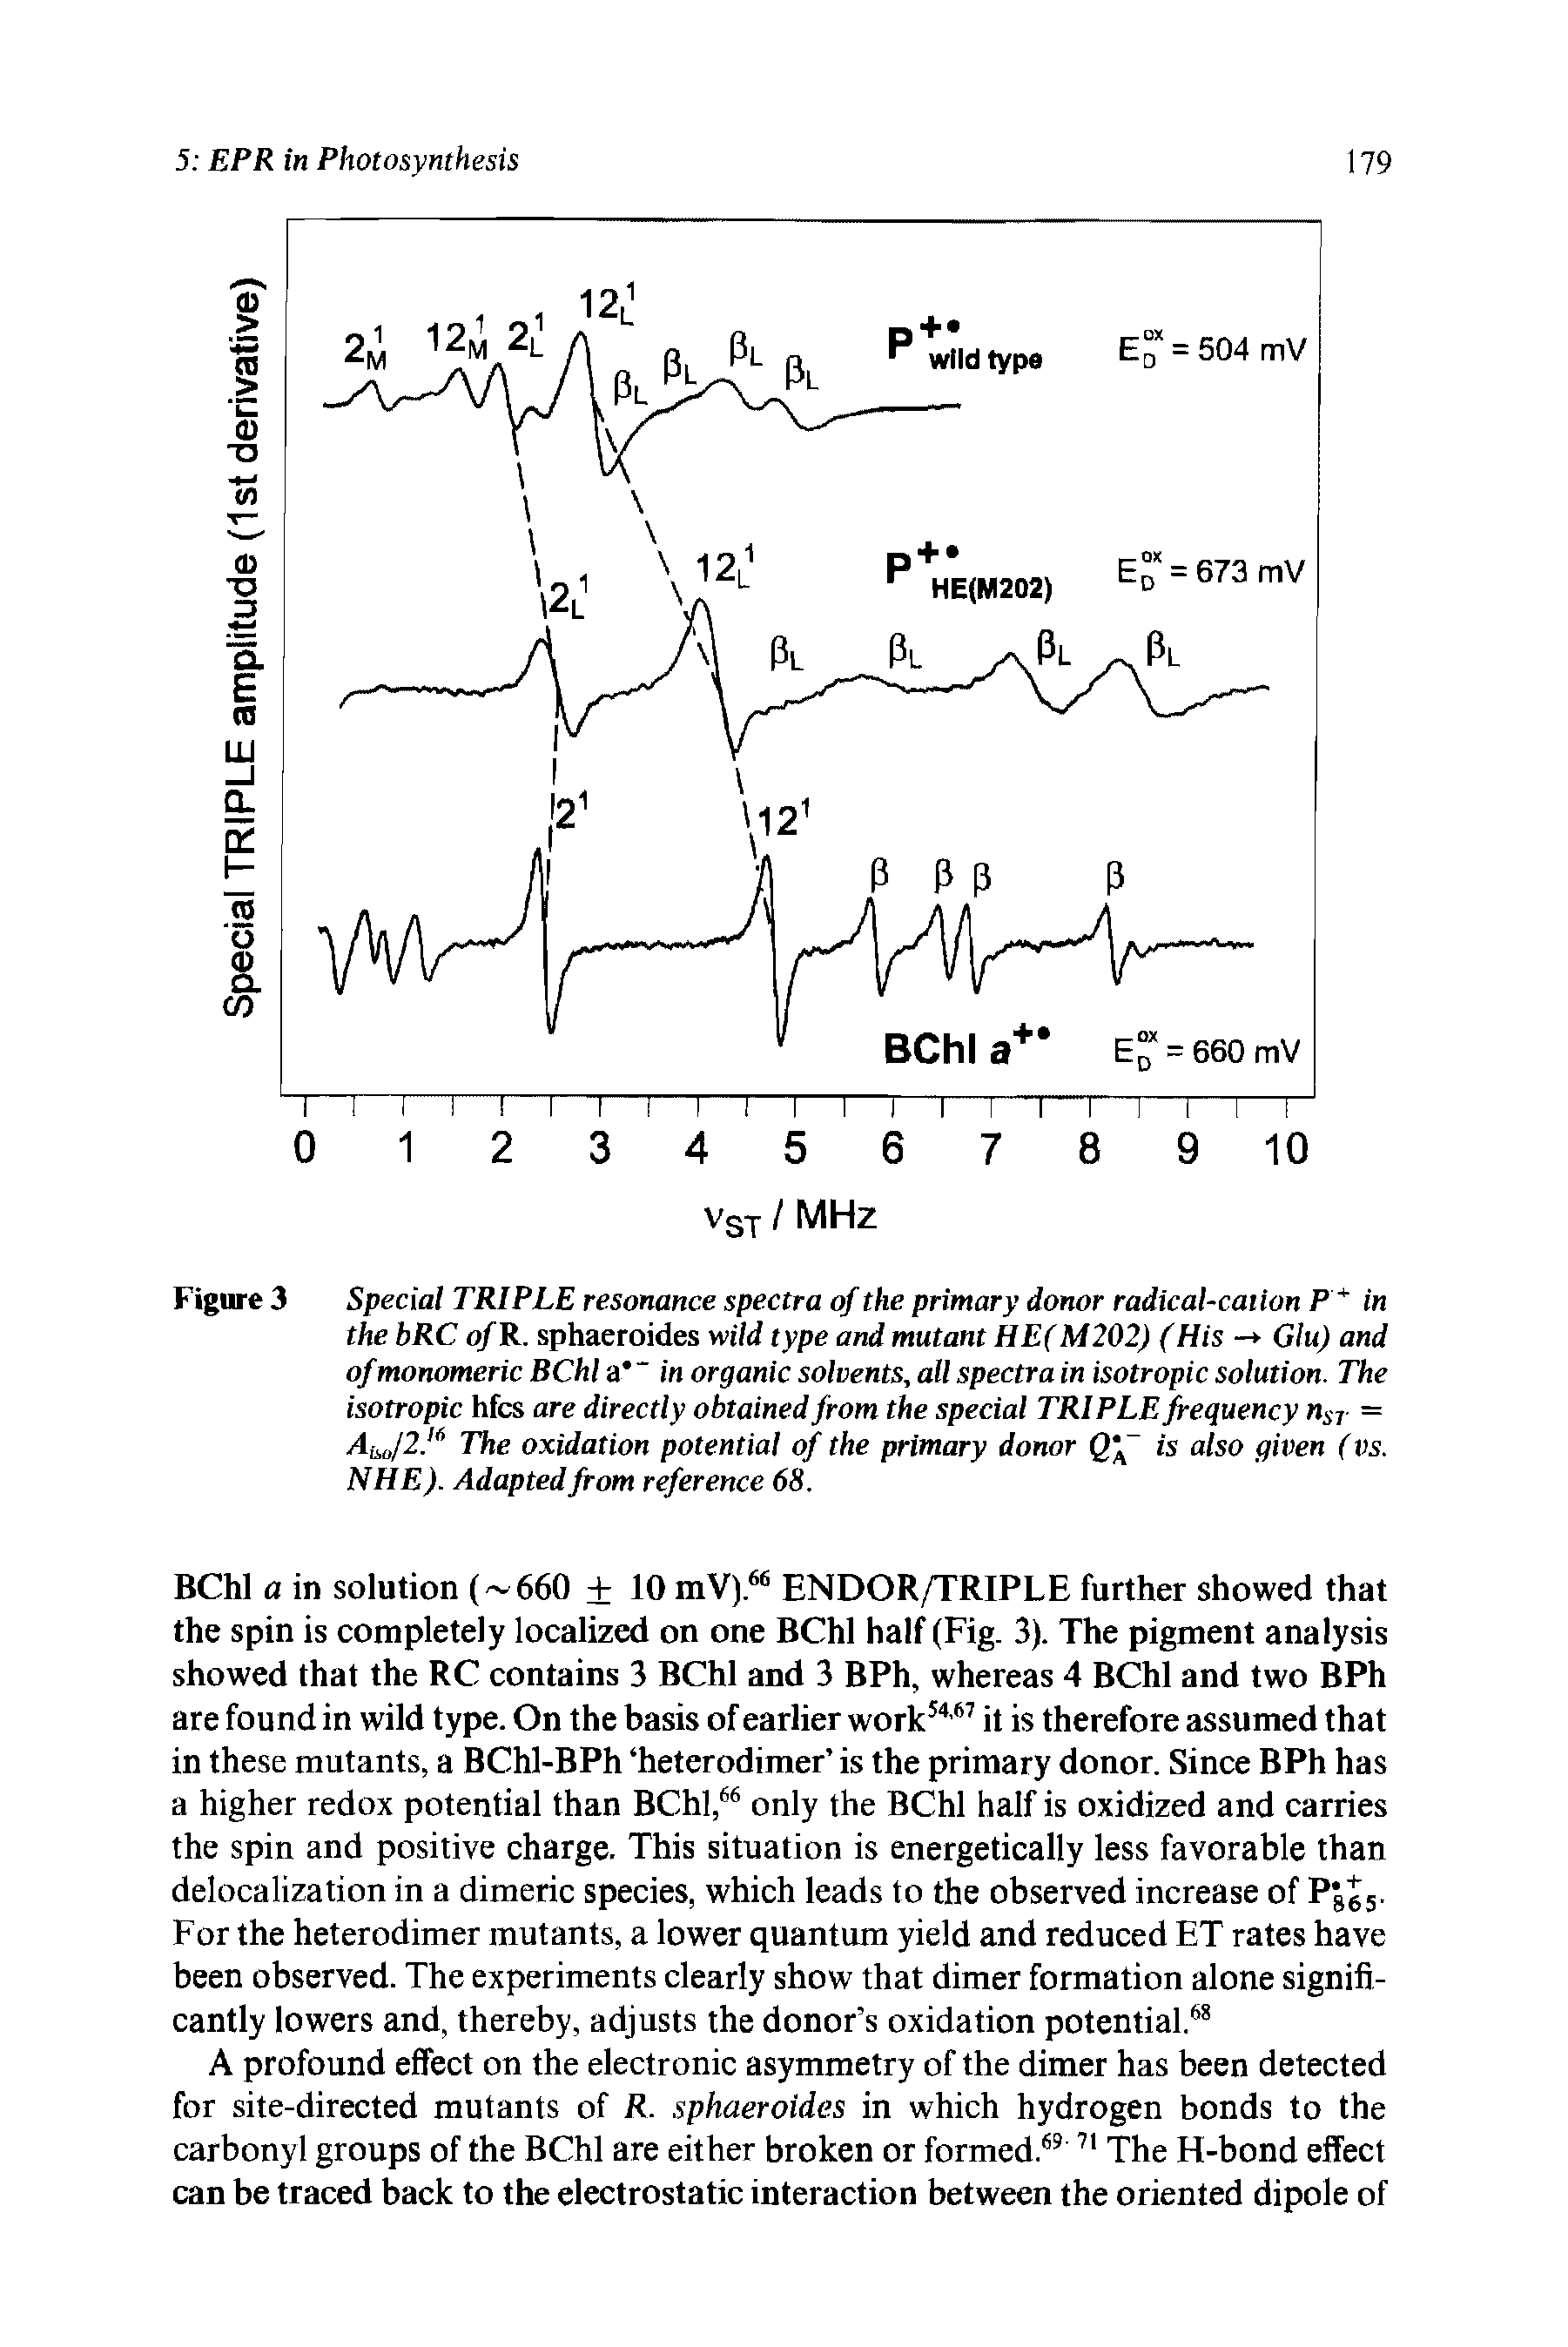 Figure 3 Special TRIPLE resonance spectra of the primary donor radical-cation P in the bRC of R. sphaeroides wild type and mutant HE(M202) (His - Glu) and of monomeric BChl a " in organic solvents, all spectra in isotropic solution. The isotropic hfcs are directly obtained from the special TRIPLE frequency nSJ = Ais,J2.H The oxidation potential of the primary donor is also given (vs. NHE). Adapted from reference 68.